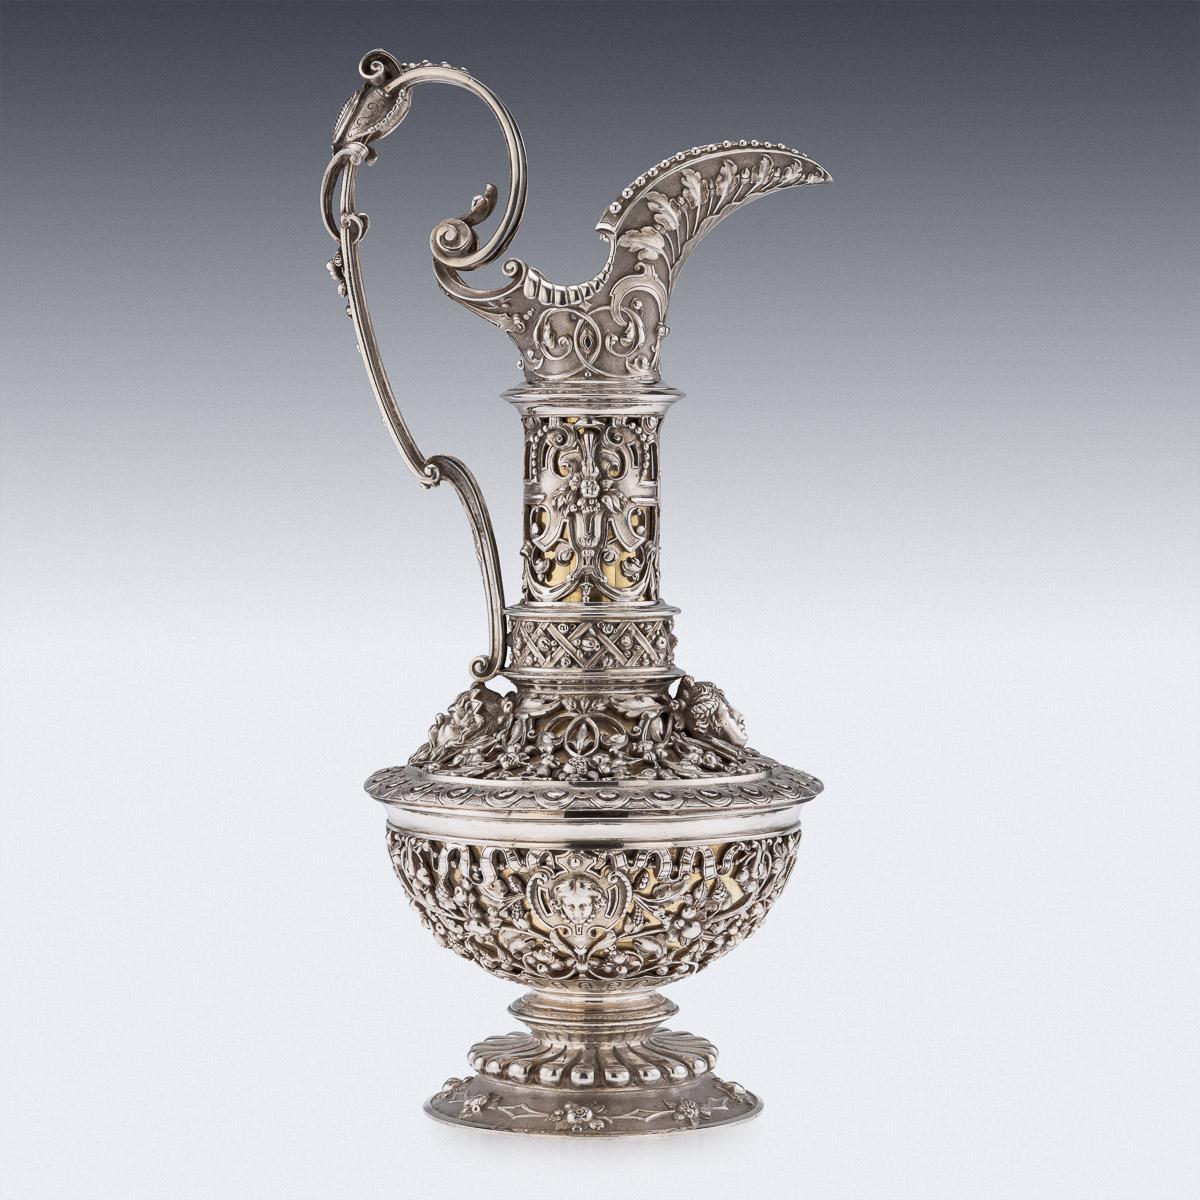 Antique 19th century French unique and exceptional solid silver figural ewer, raised on a circular foot applied with cast mythological figures, the tall baluster shaped, double walled body is gilt and further applied with cast scrolling foliage